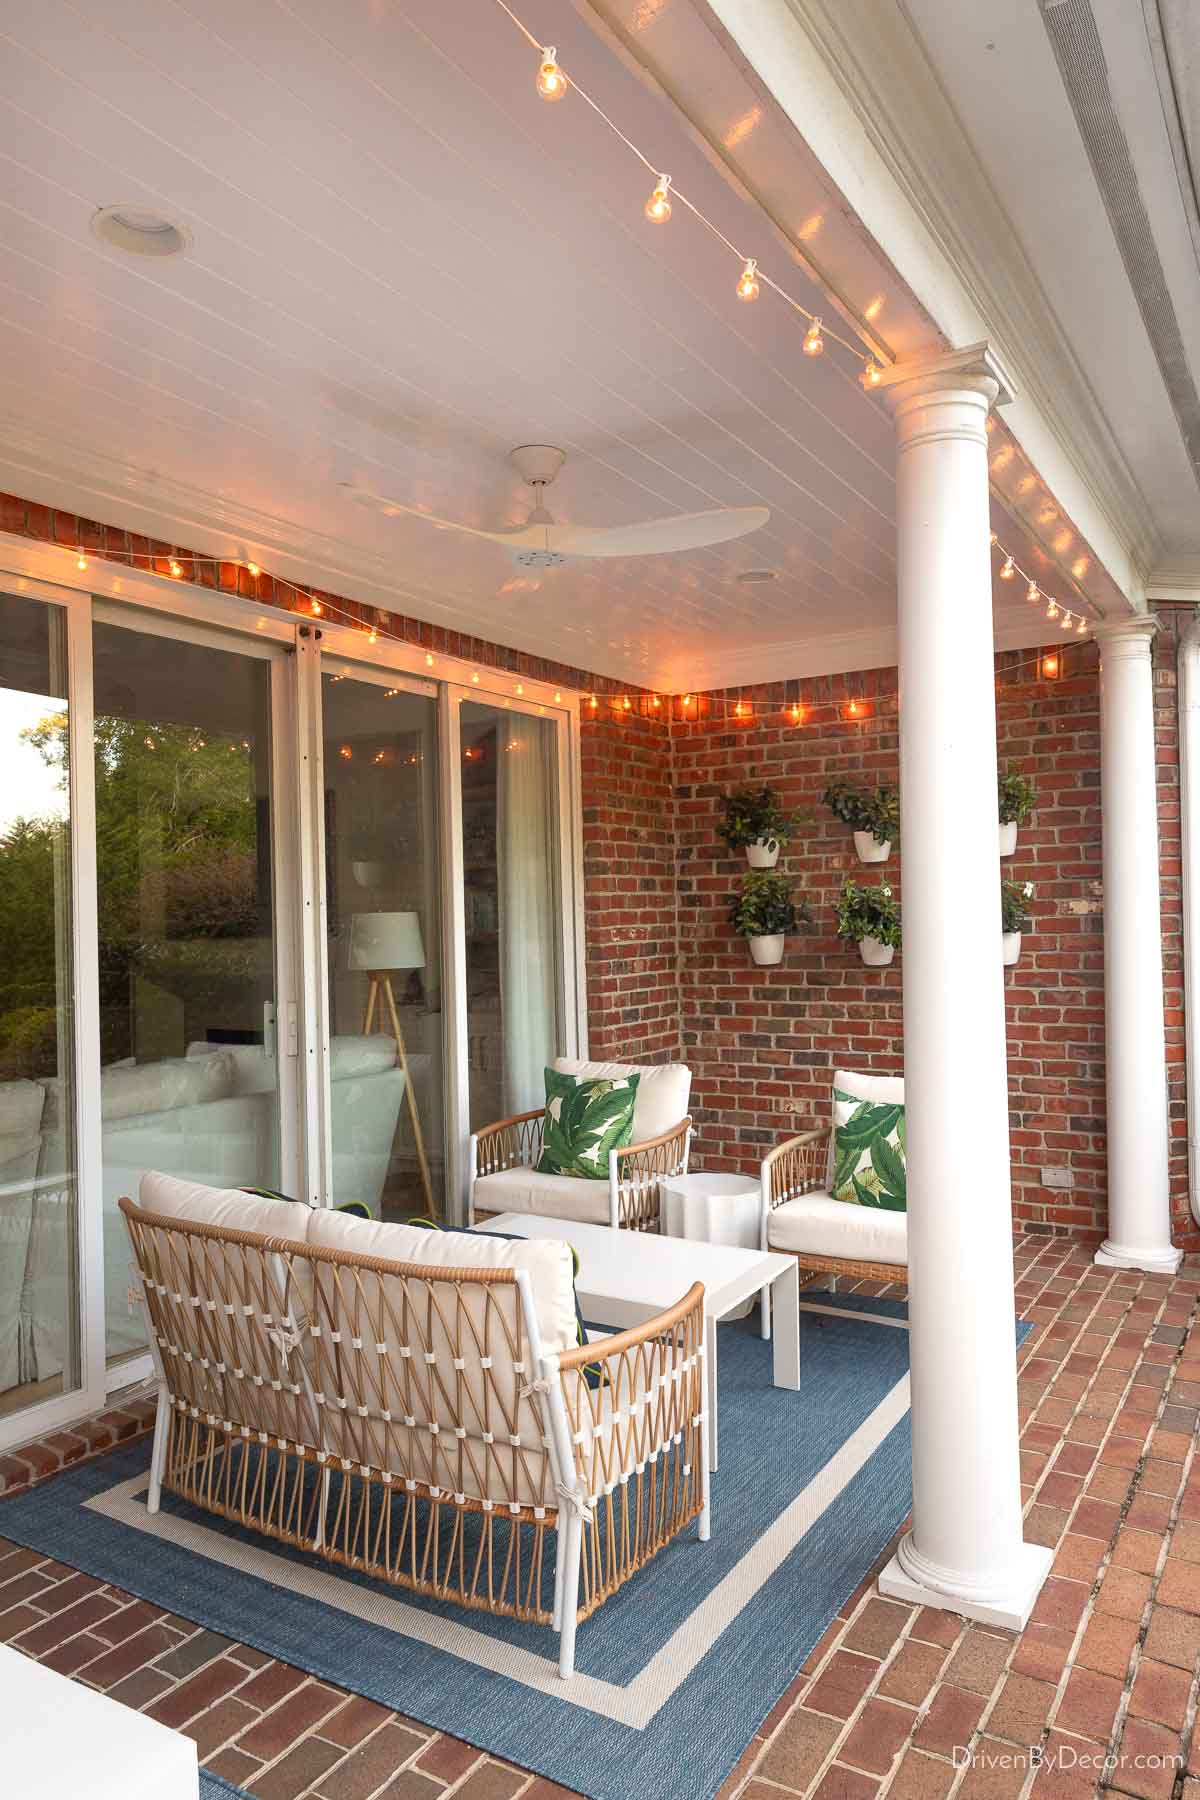 String lights draped around covered patio